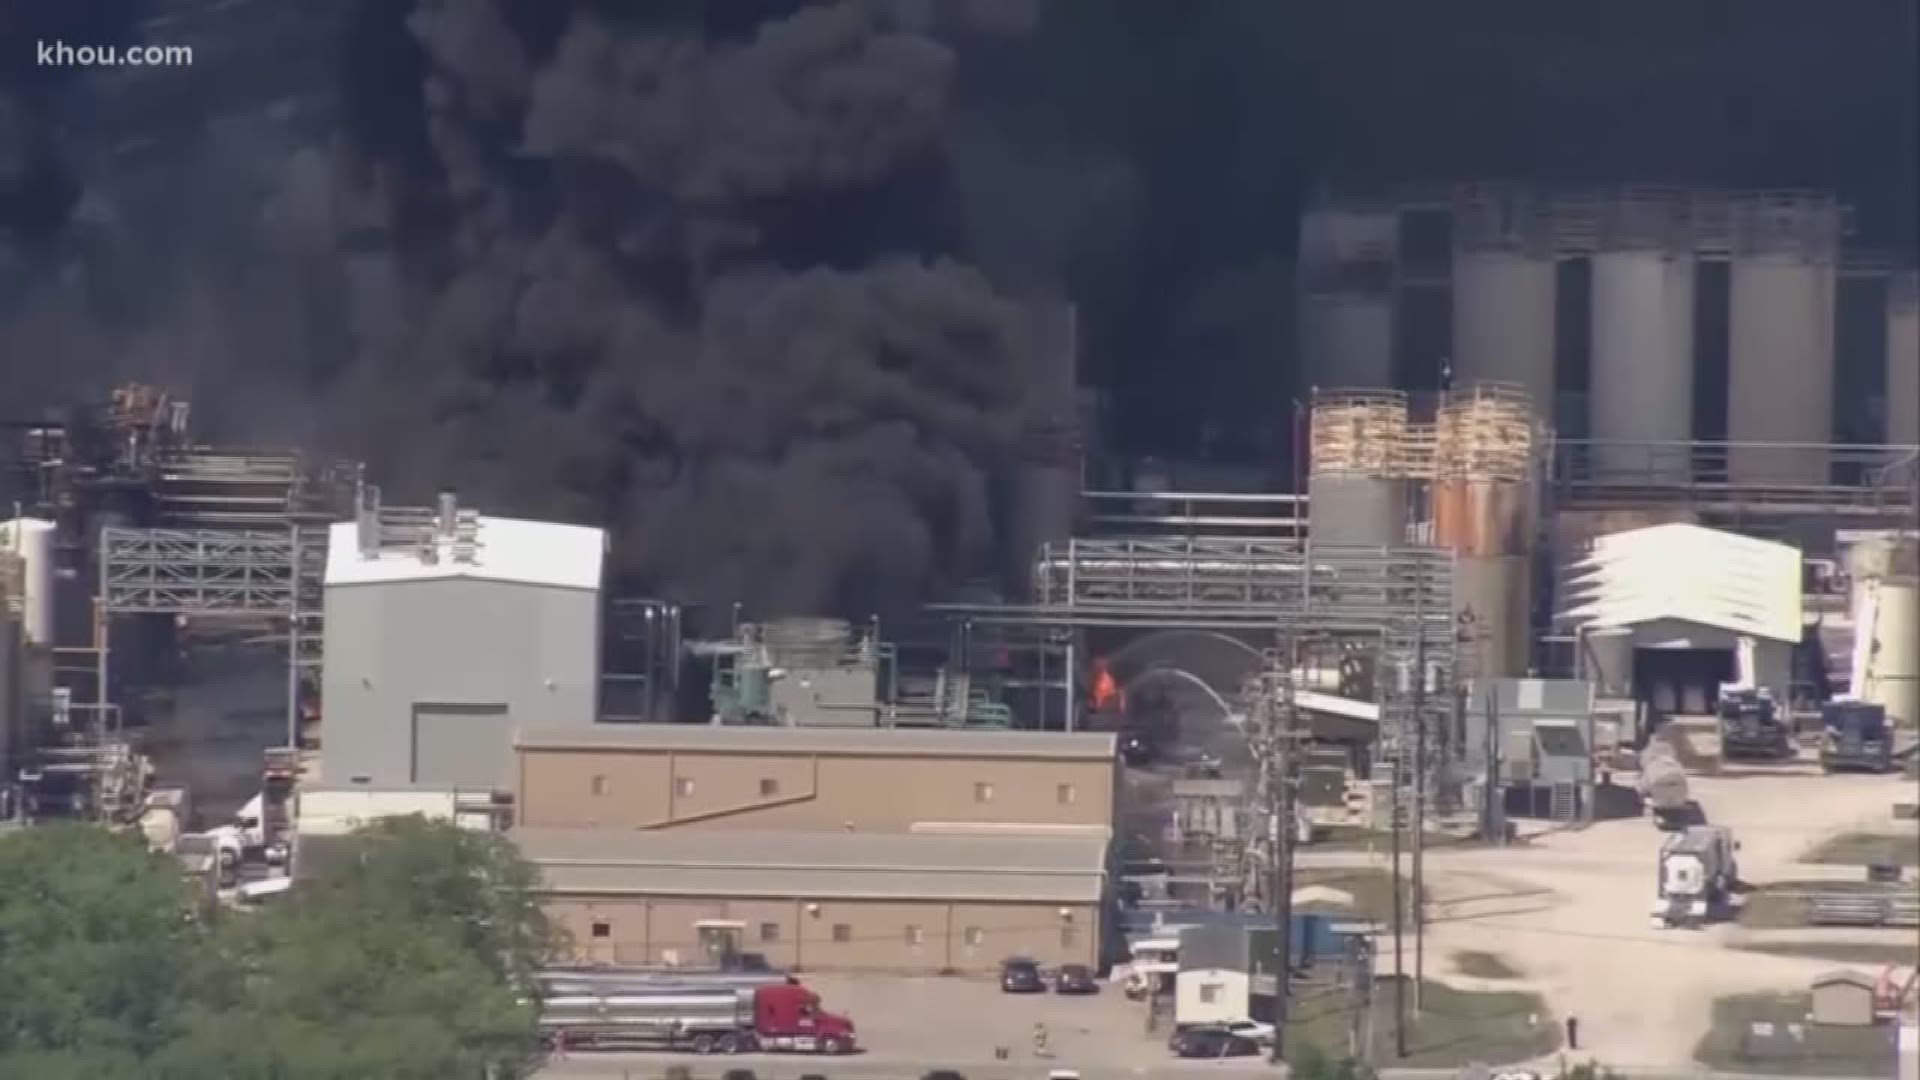 KMCO has decided to lay off dozens of employees about a month after the Crosby chemical plant caught fire in an explosion. One person died in that fire.